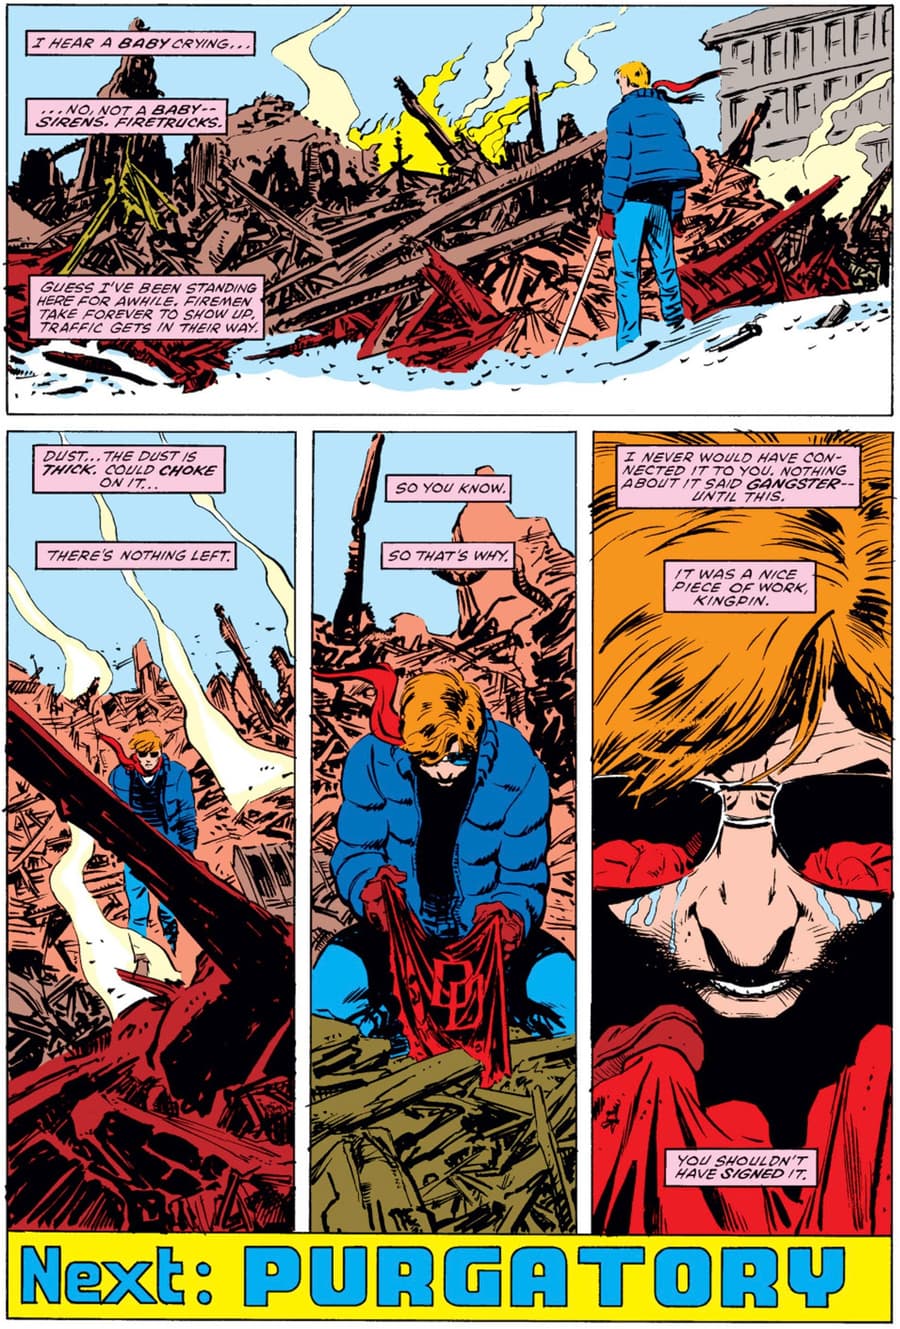 DAREDEVIL (1964) #227 page by Frank Miller and David Mazzucchelli